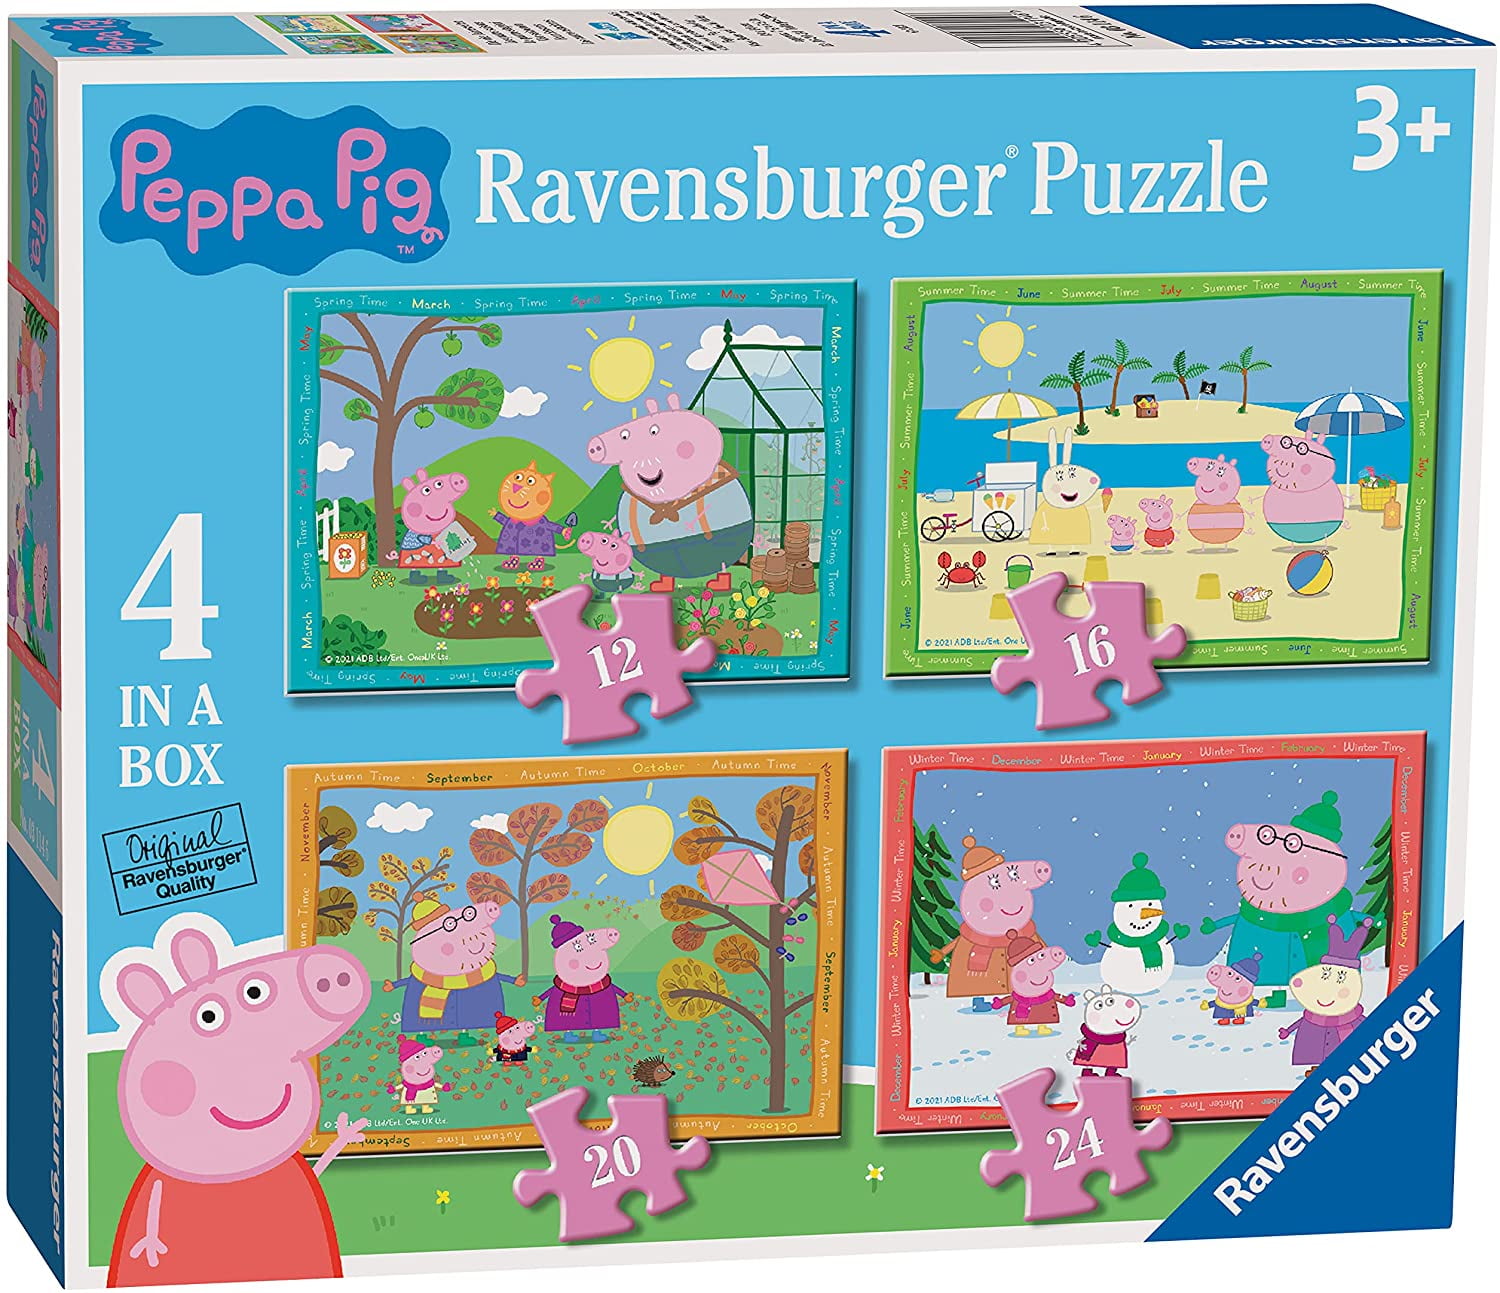 12, 16, 20, 24 NEW Ravensburger Peppa Pig 4 in a Box Jigsaw Puzzle 